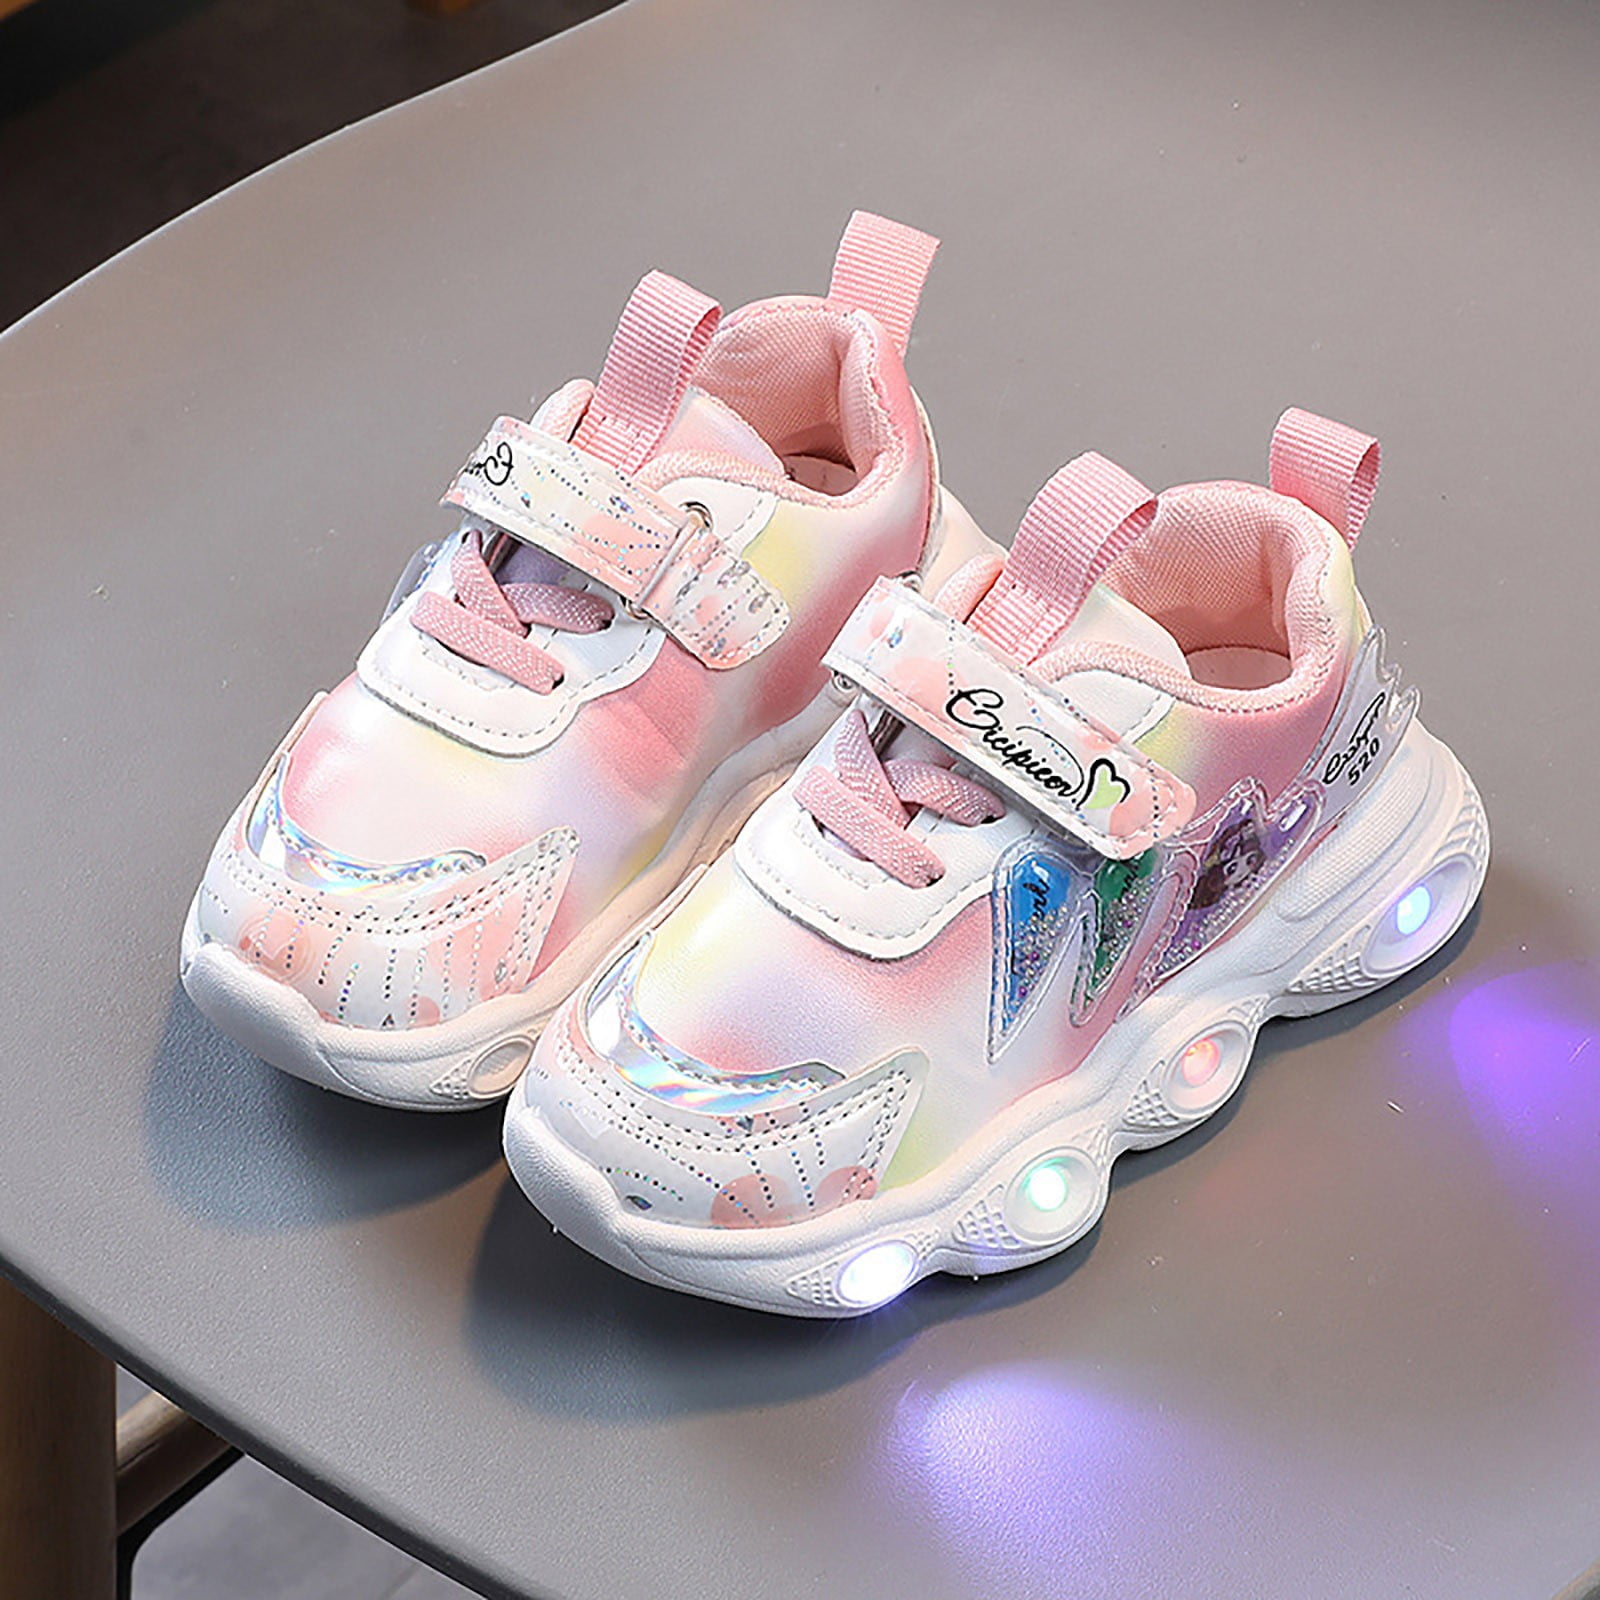 2DXuixsh Baby Girl Tennis Shoes Light Up Shoes For Girls Toddler Led  Walking Shoes Girls Kids Children Baby Casual Shoes Girls shoes Boots Size  13 Pu Pink 22 